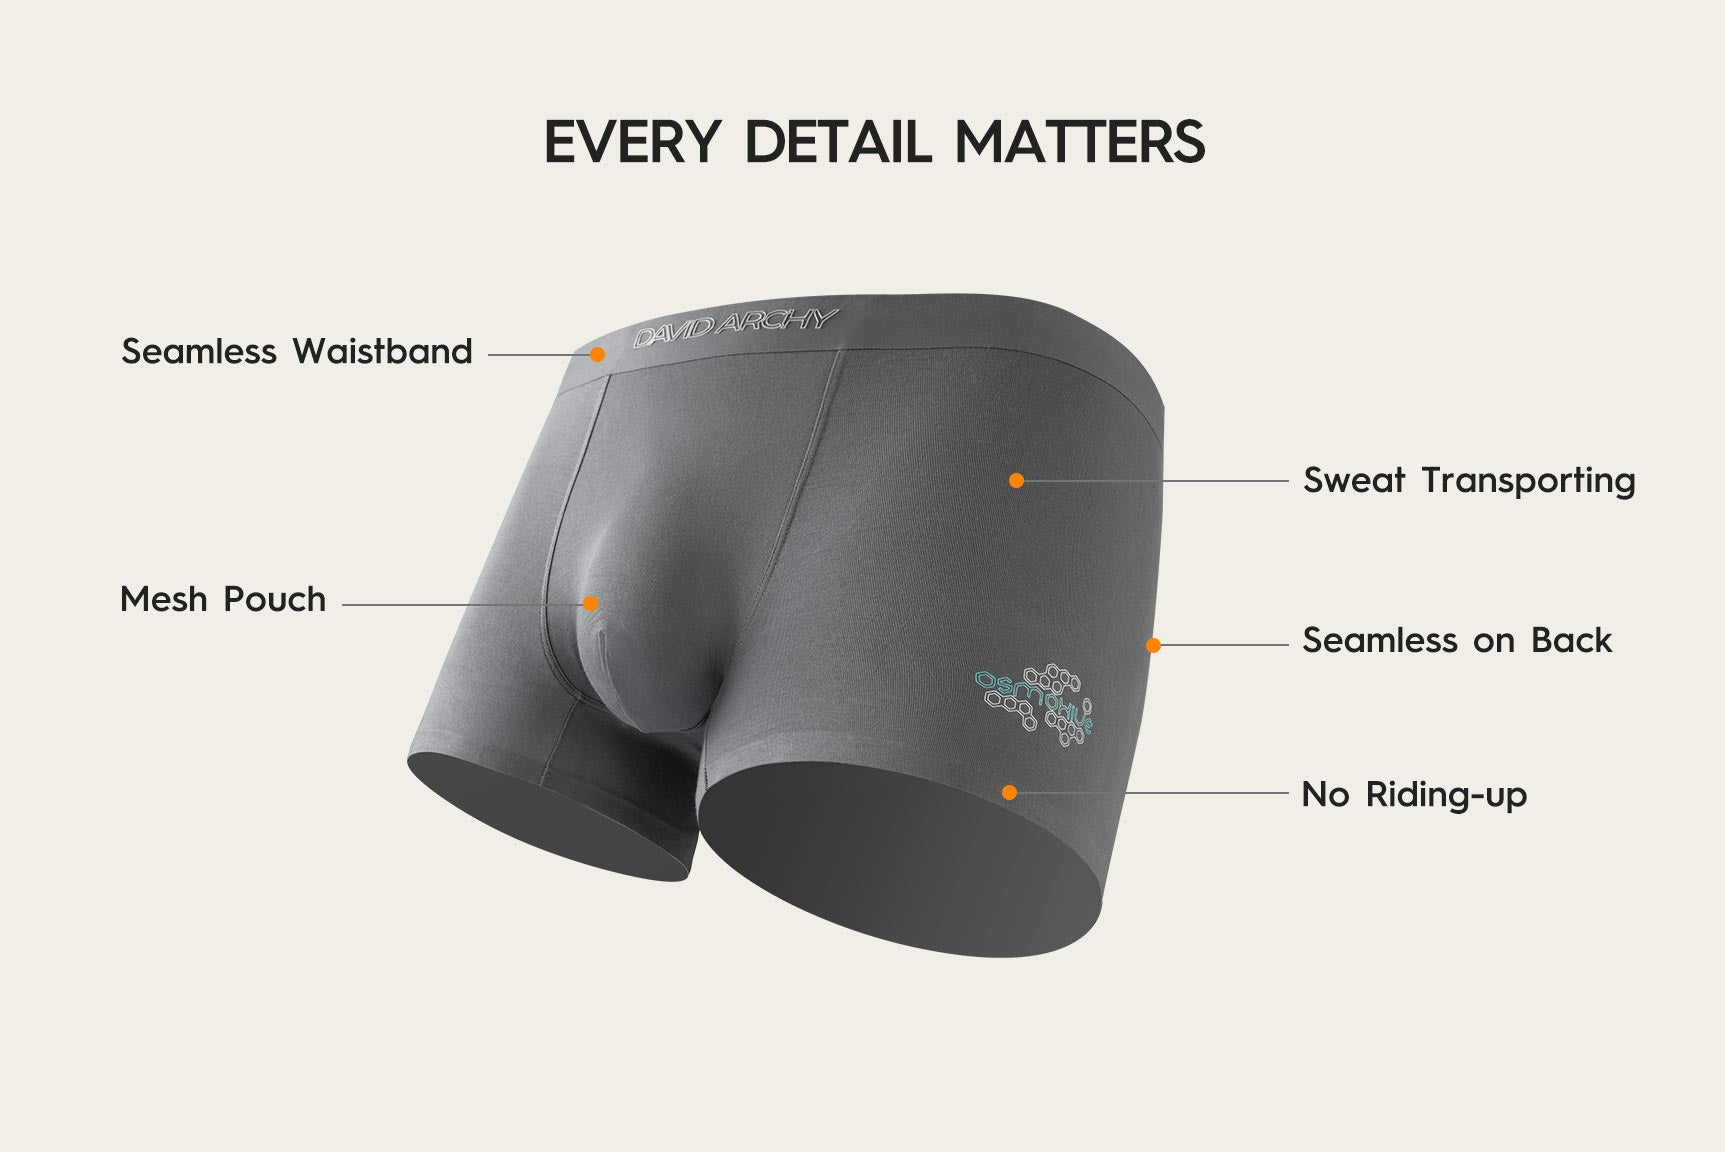 Do you know the composition of men's underwear